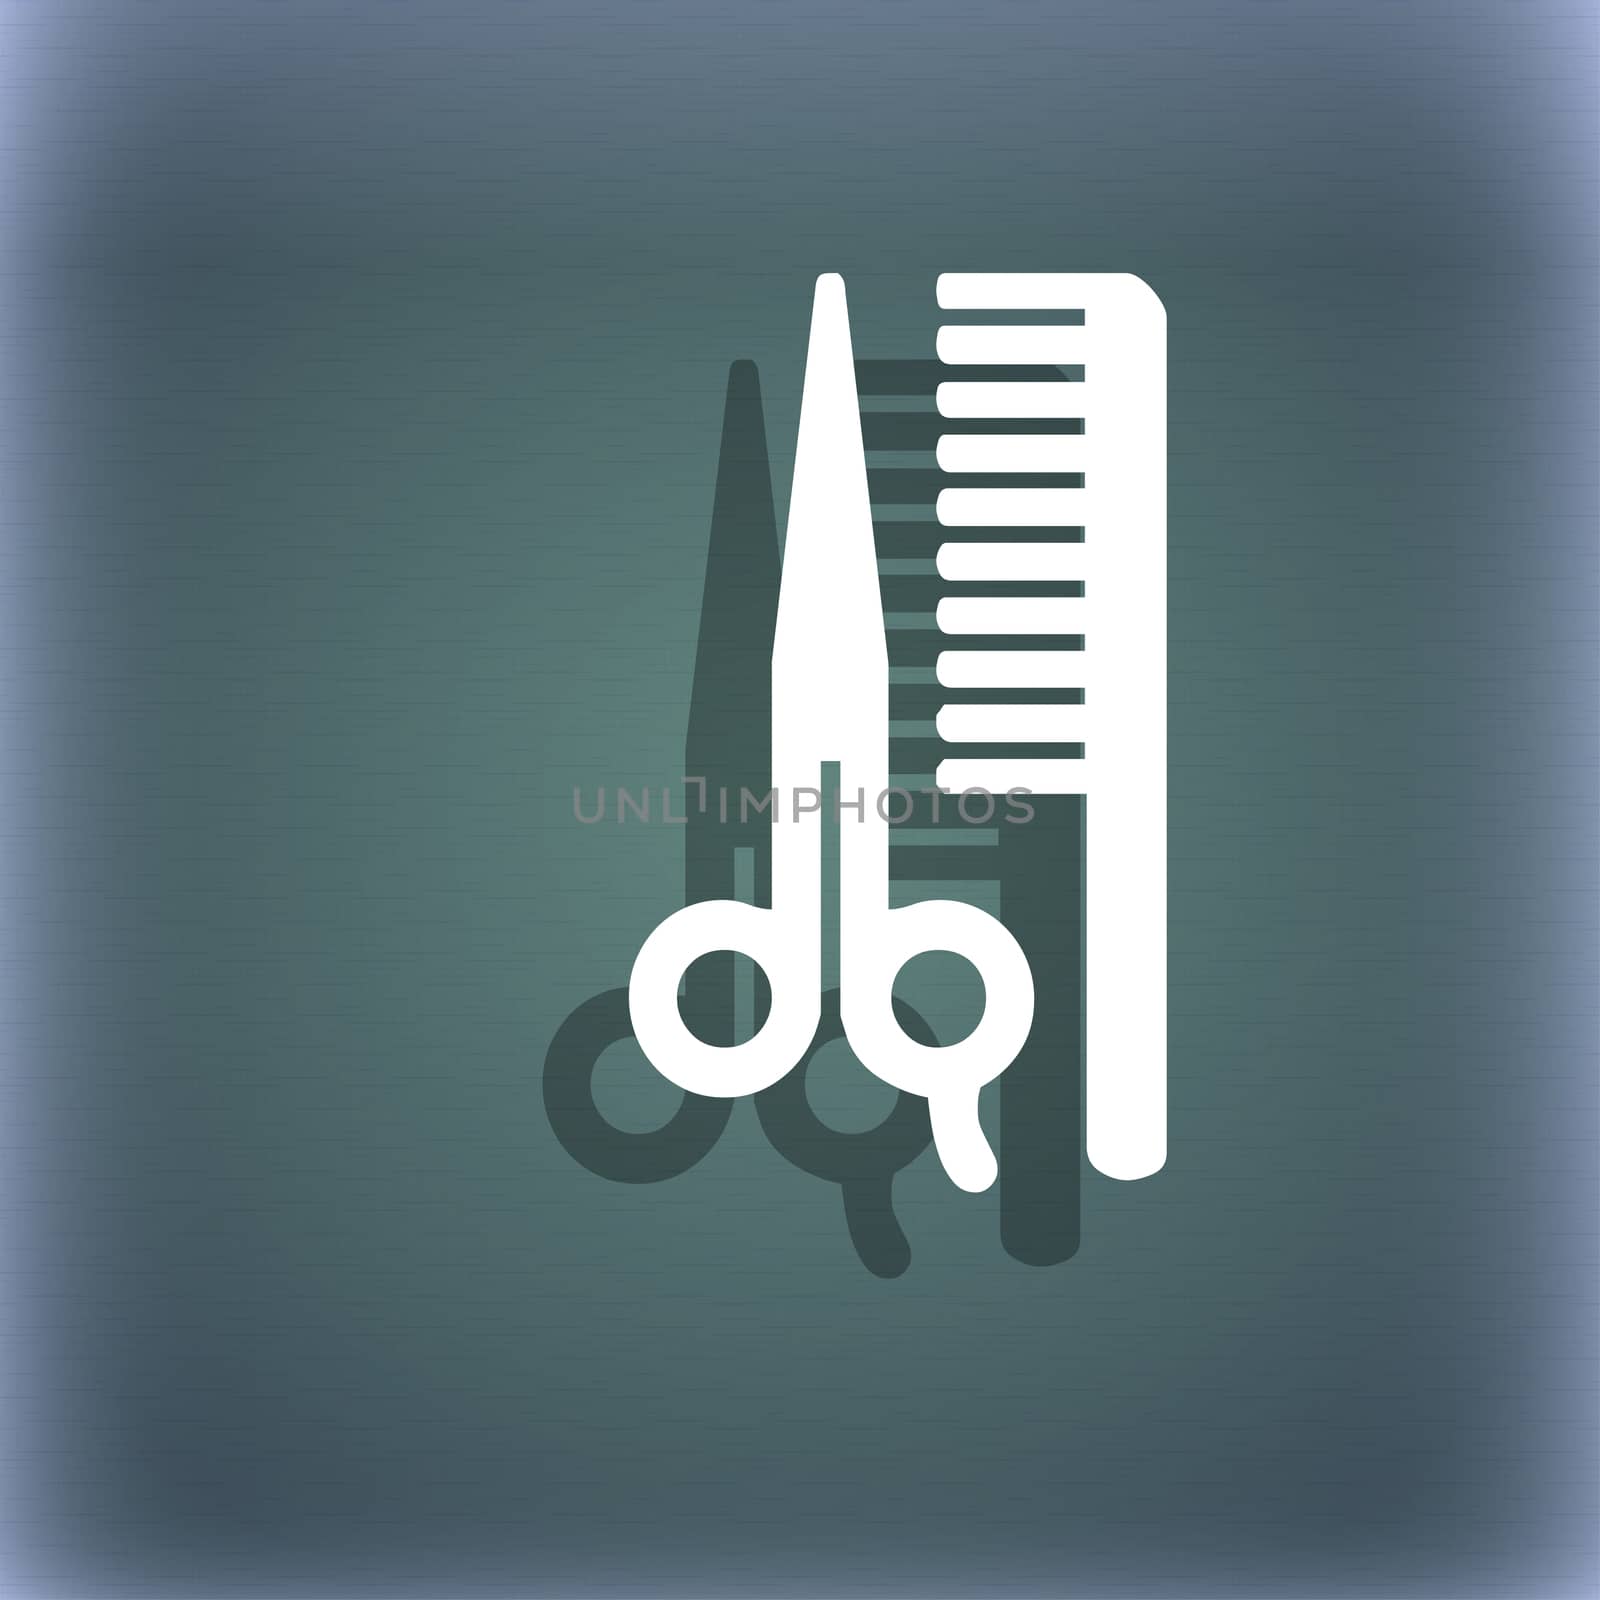 hair icon symbol on the blue-green abstract background with shadow and space for your text. illustration